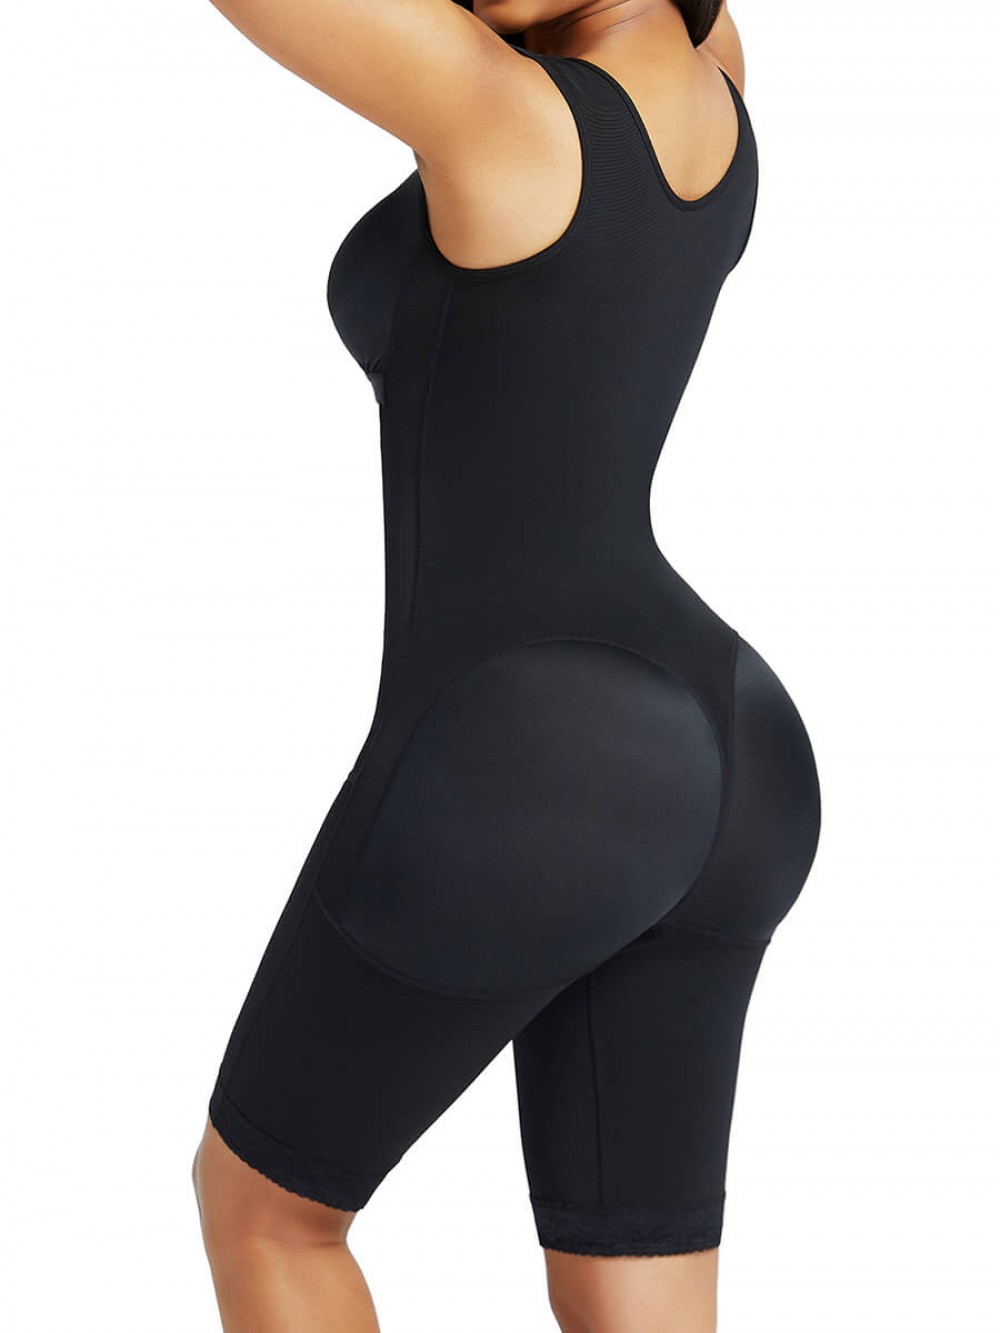 Black Smooth Silhouette Butt Lifter Shapewear Supperfit Everyday Shaping Haute Contour